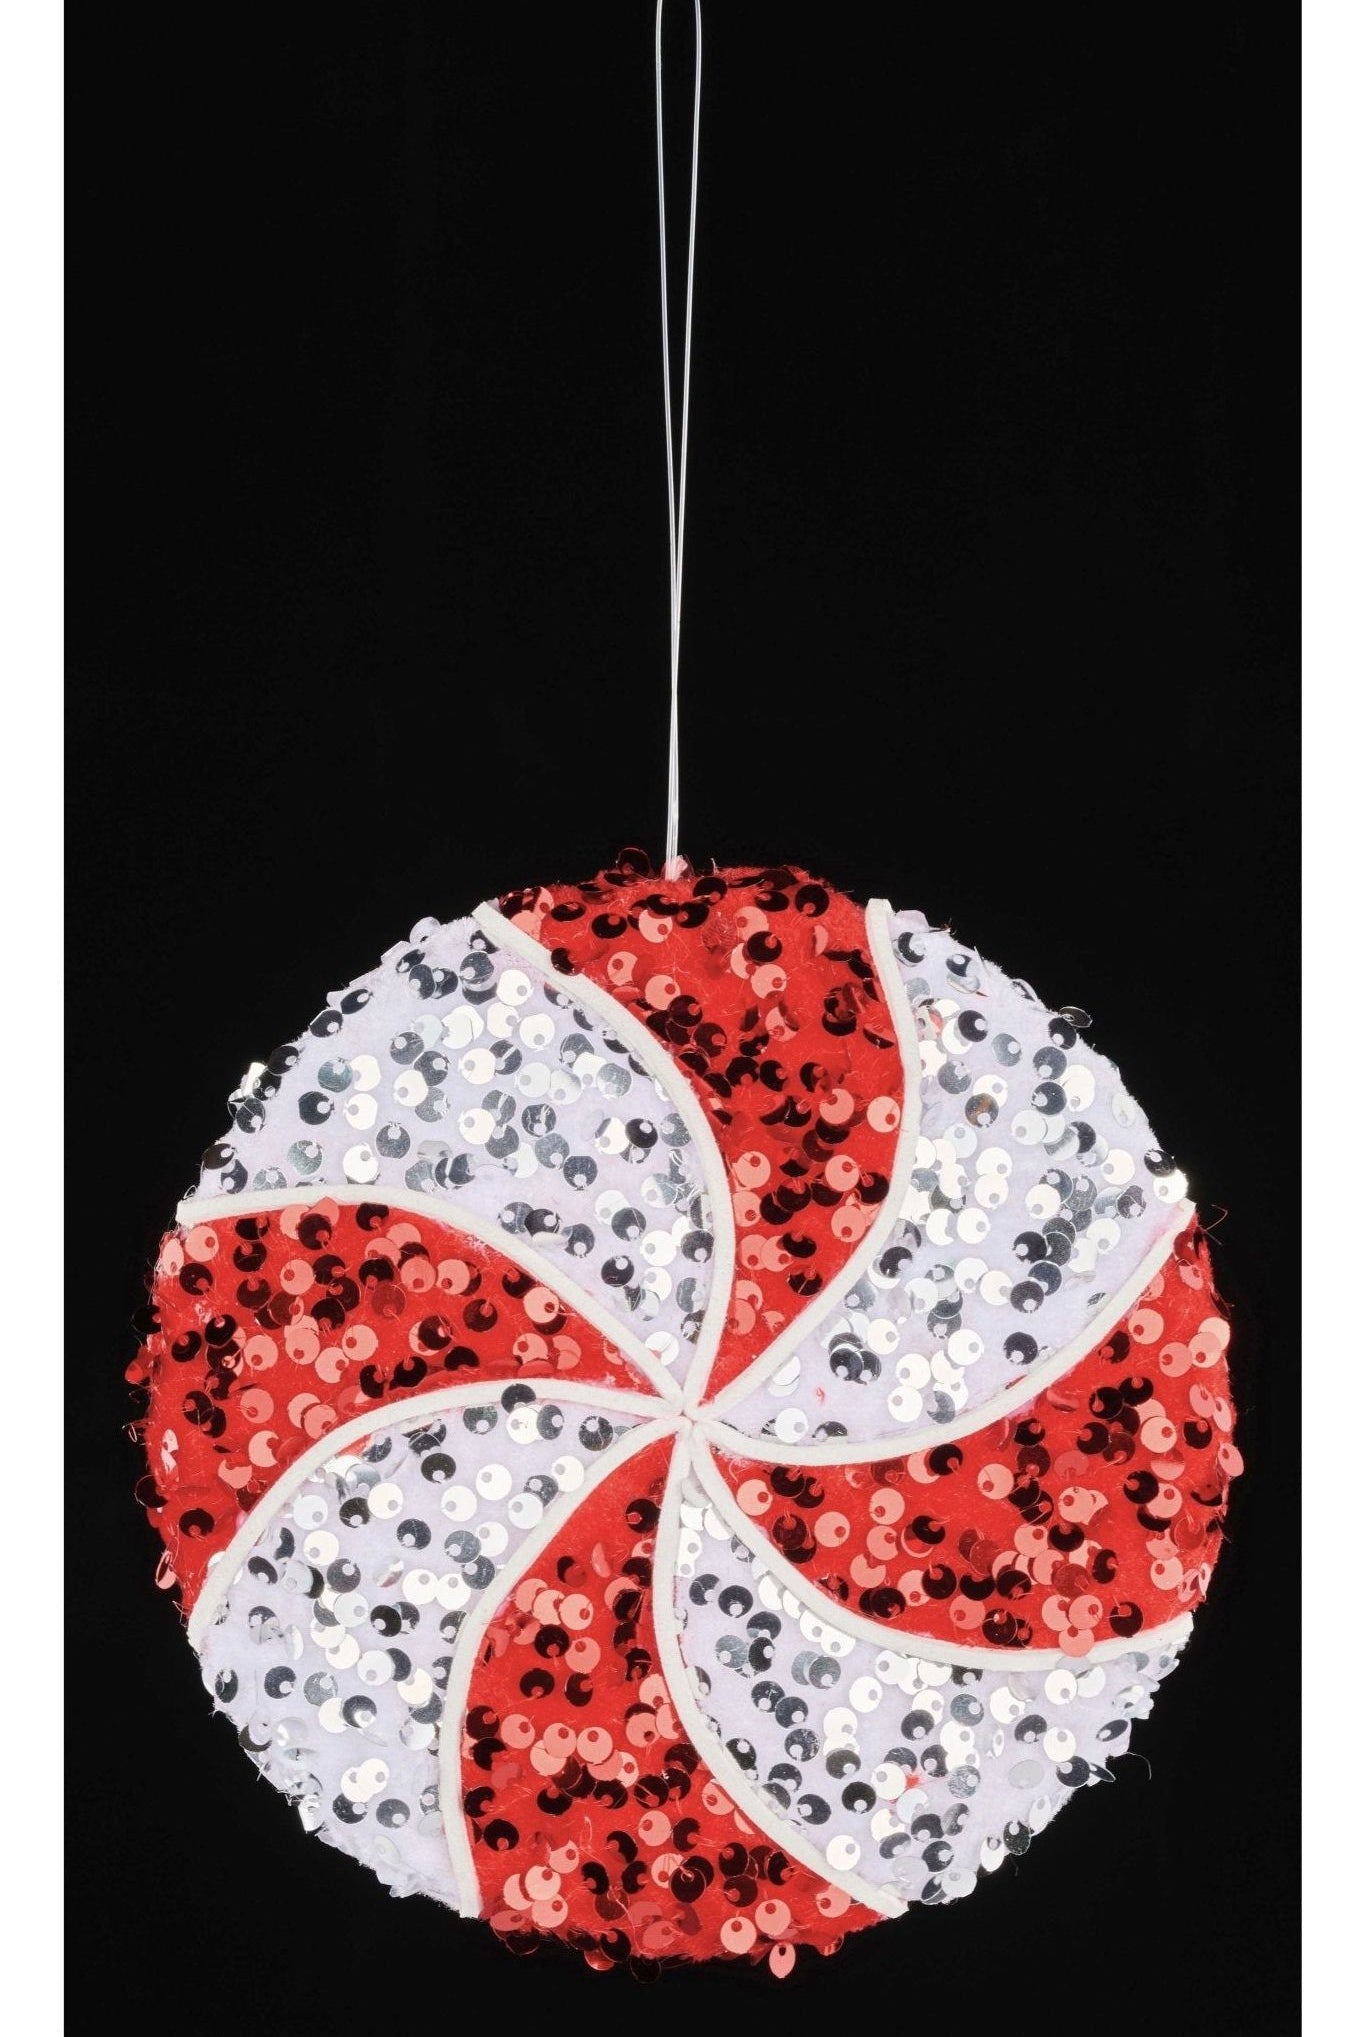 Shop For 6" Sequin Peppermint Ornament: Red/White XJ537739